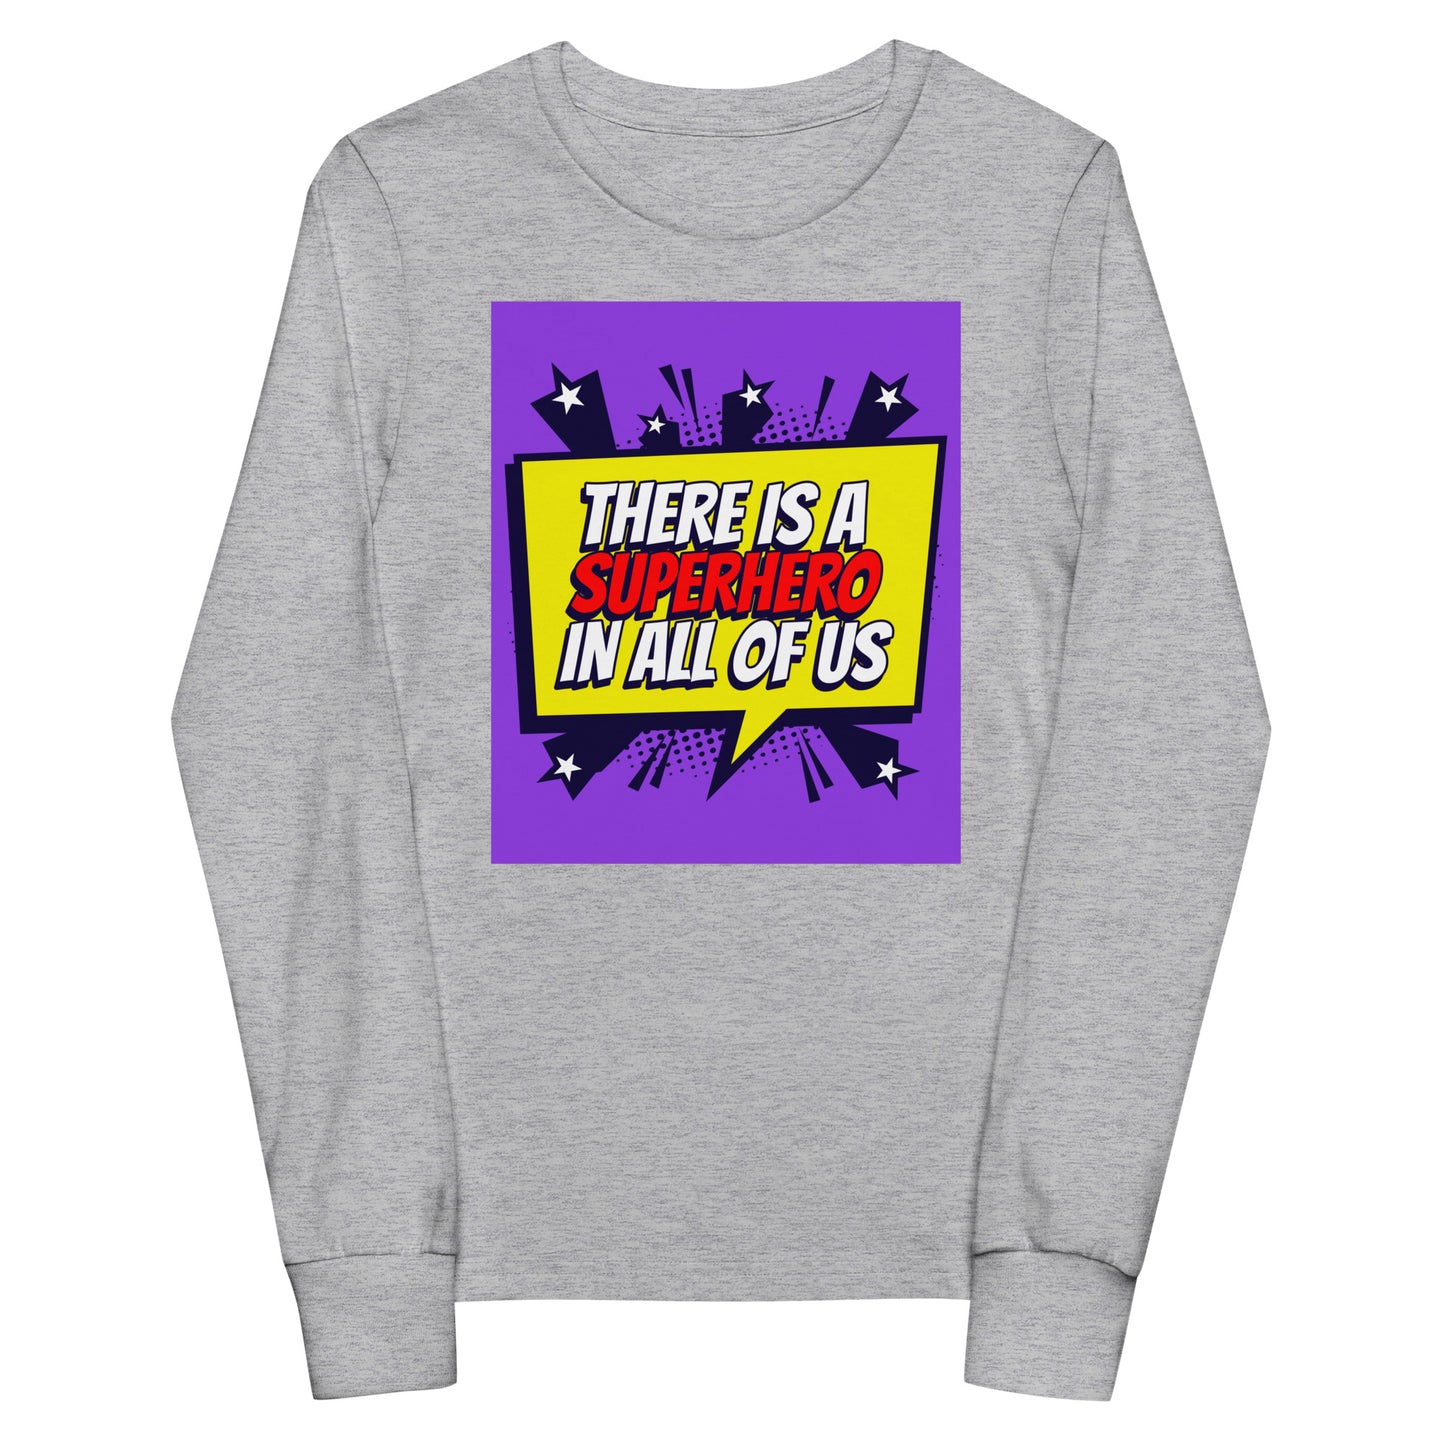 Kids Youth long sleeve tee In There is superhero in all of us